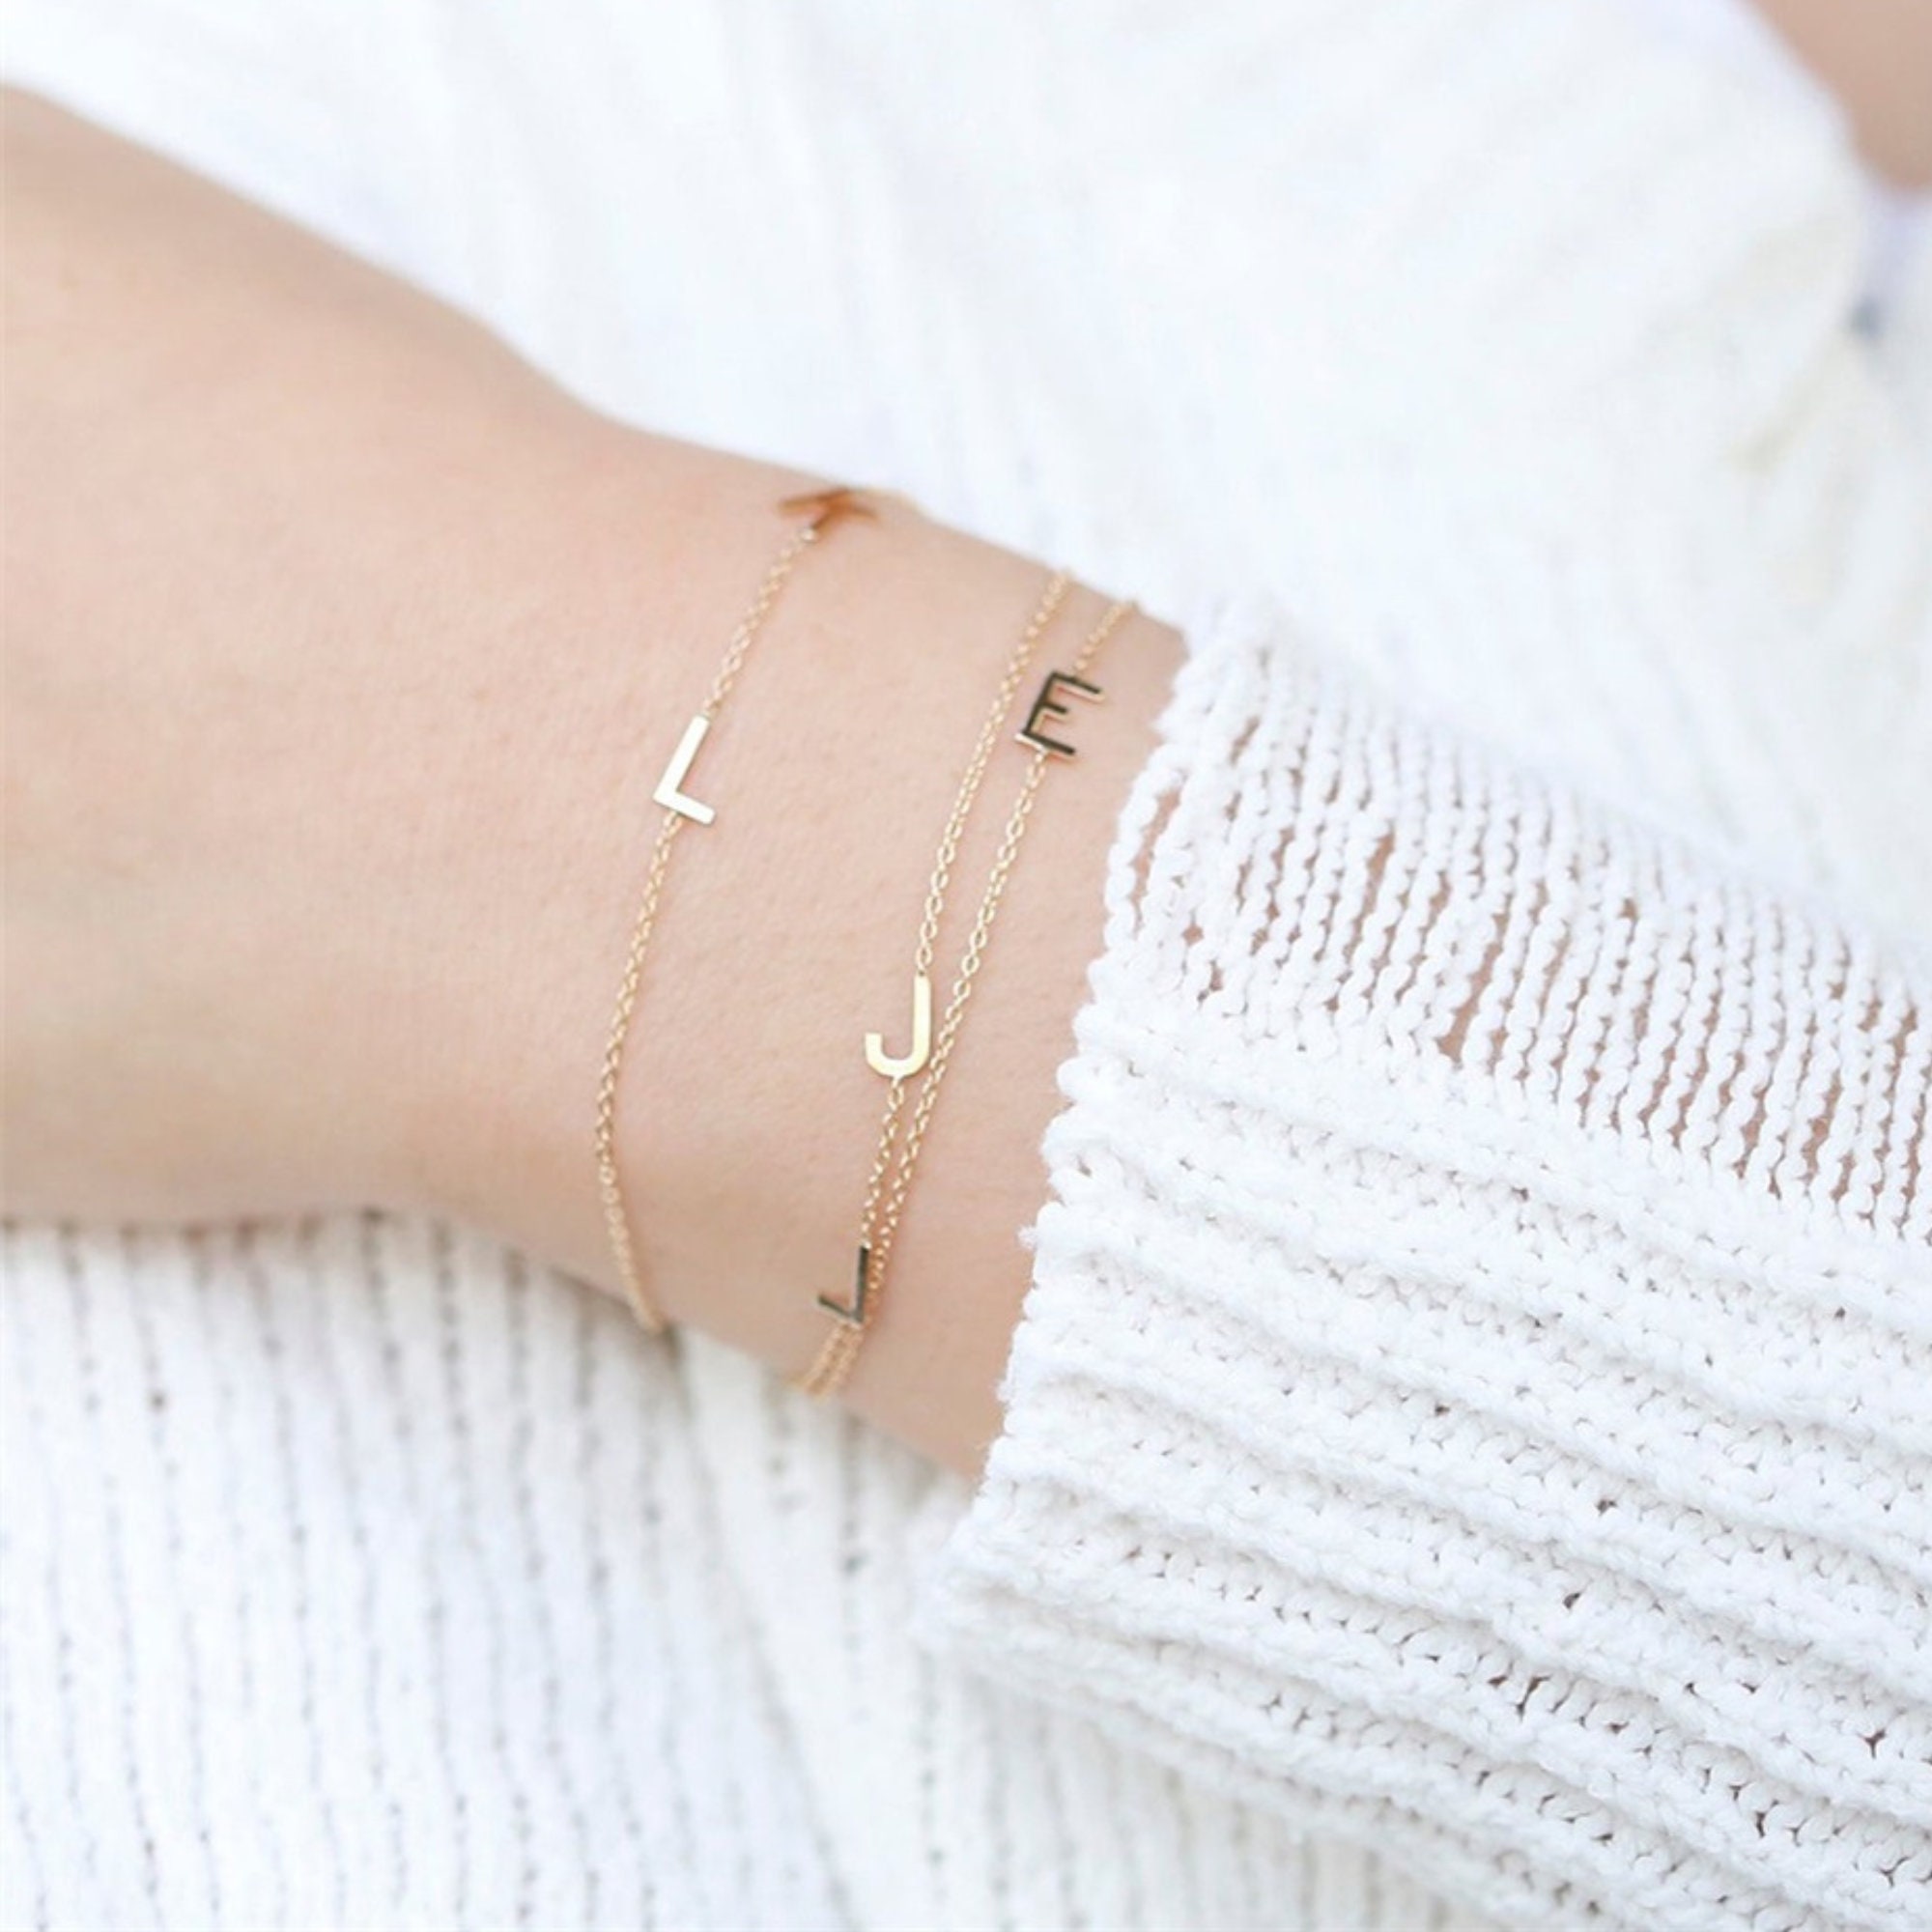 Happy friday beautiful ✨ Featuring our Sideways Letter Bracelet